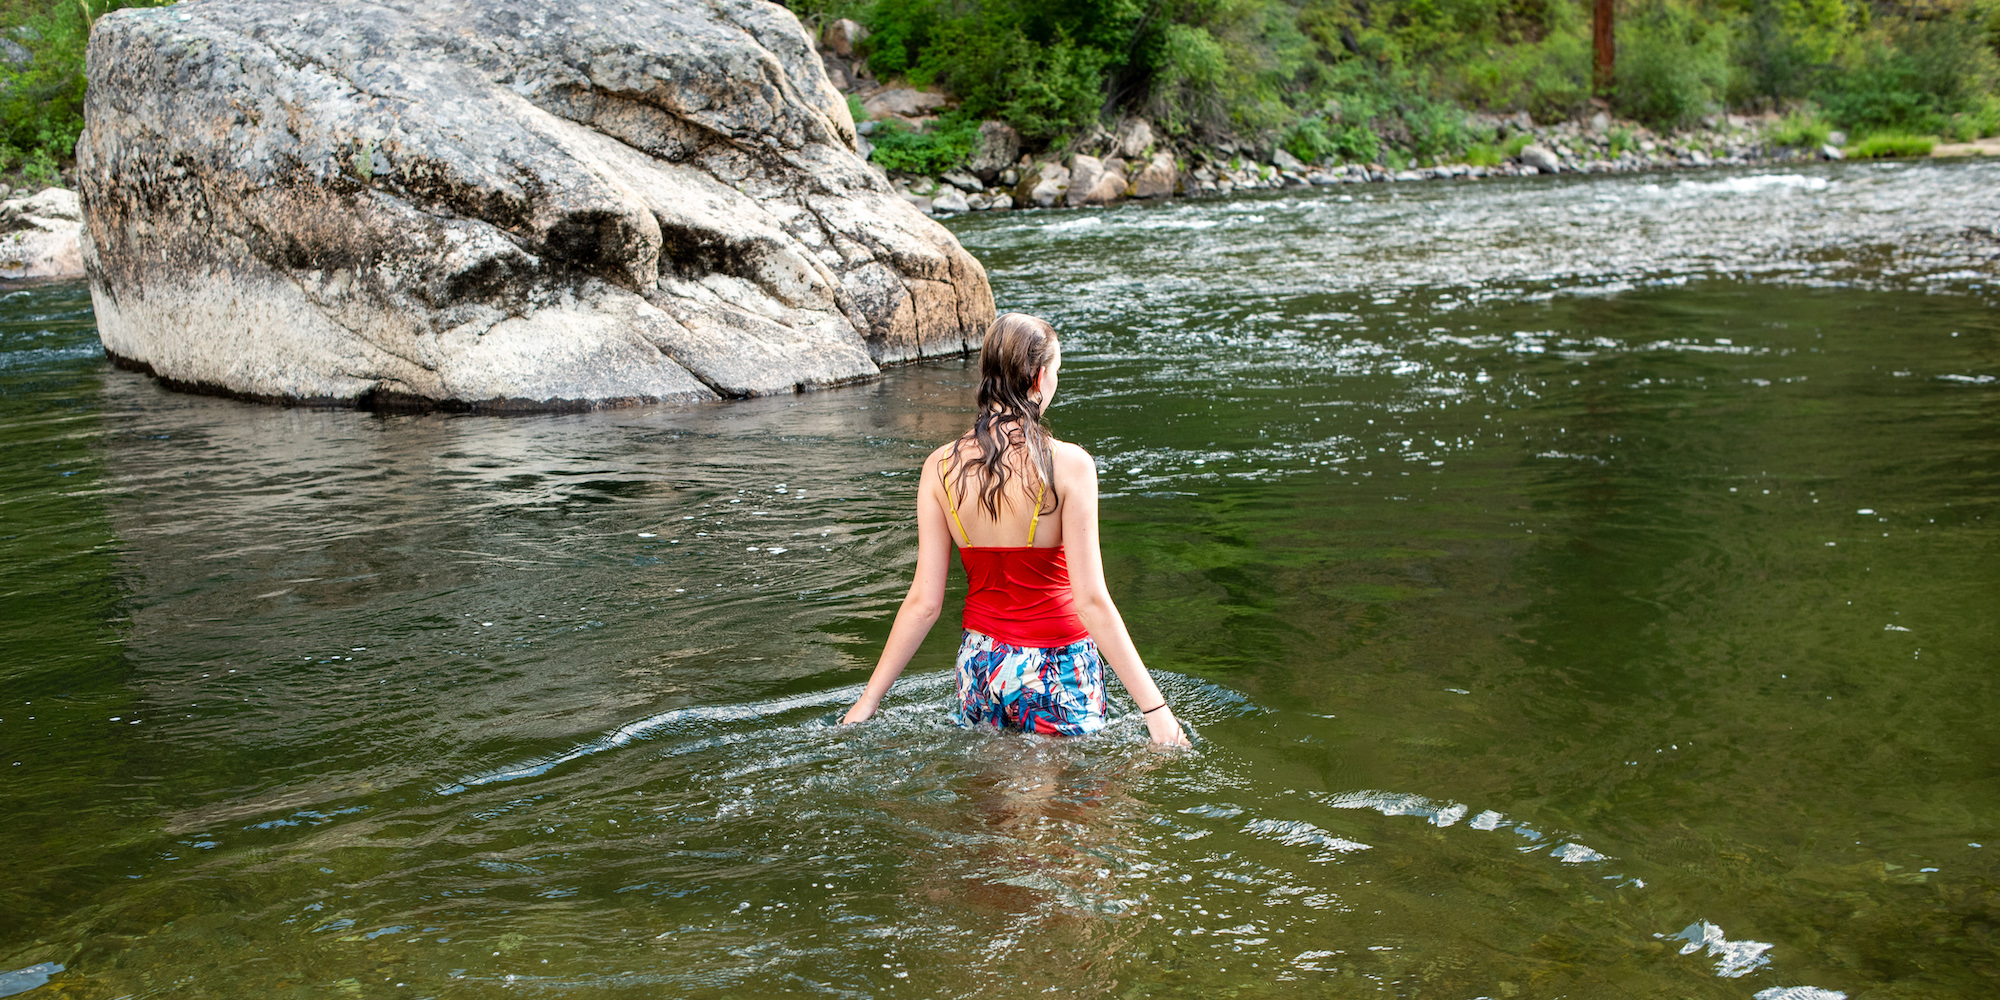 The back of a women getting ready to dive into the river by a boulder to cool off on a summer day